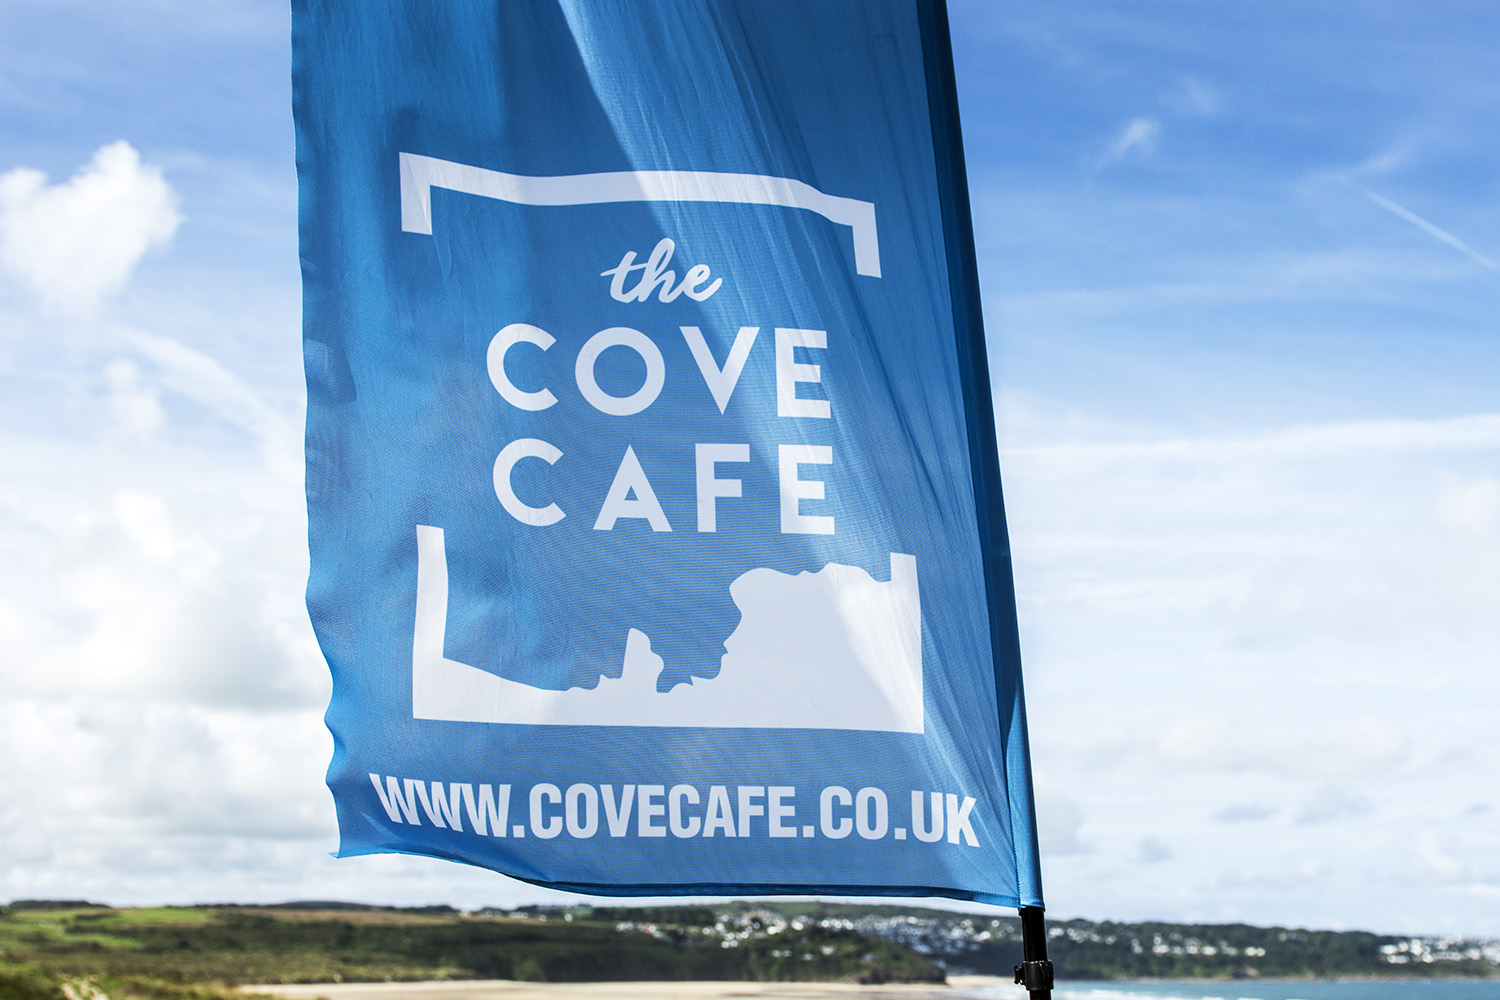 The Cove Cafe, Hayle, Cornwall